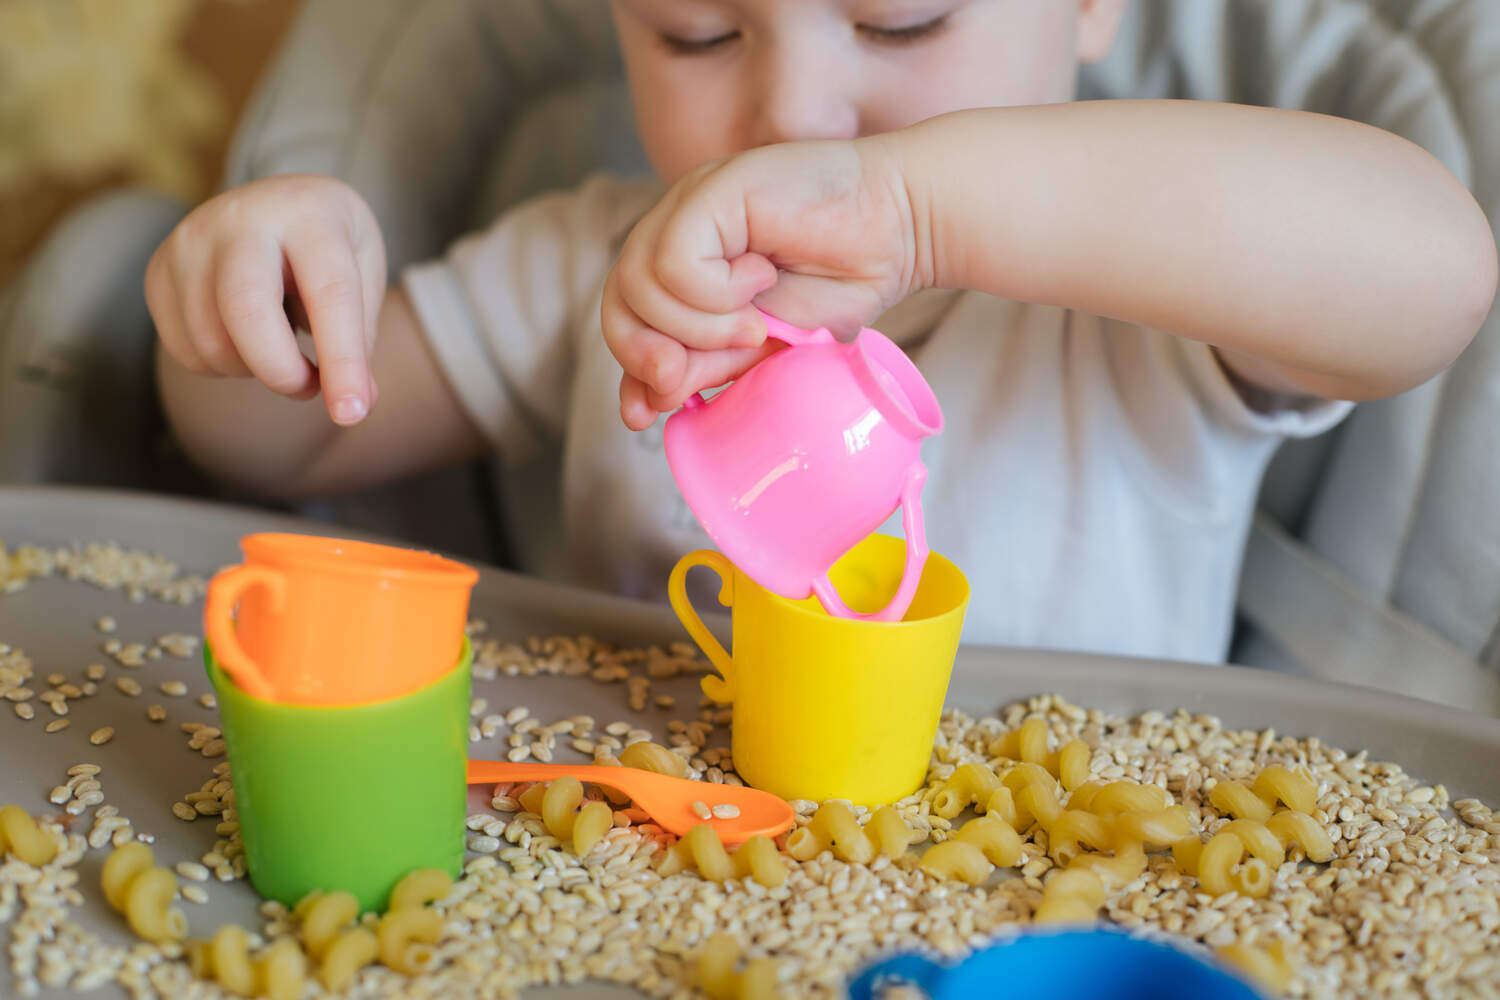 A toddler playing with pulses, grains etc.